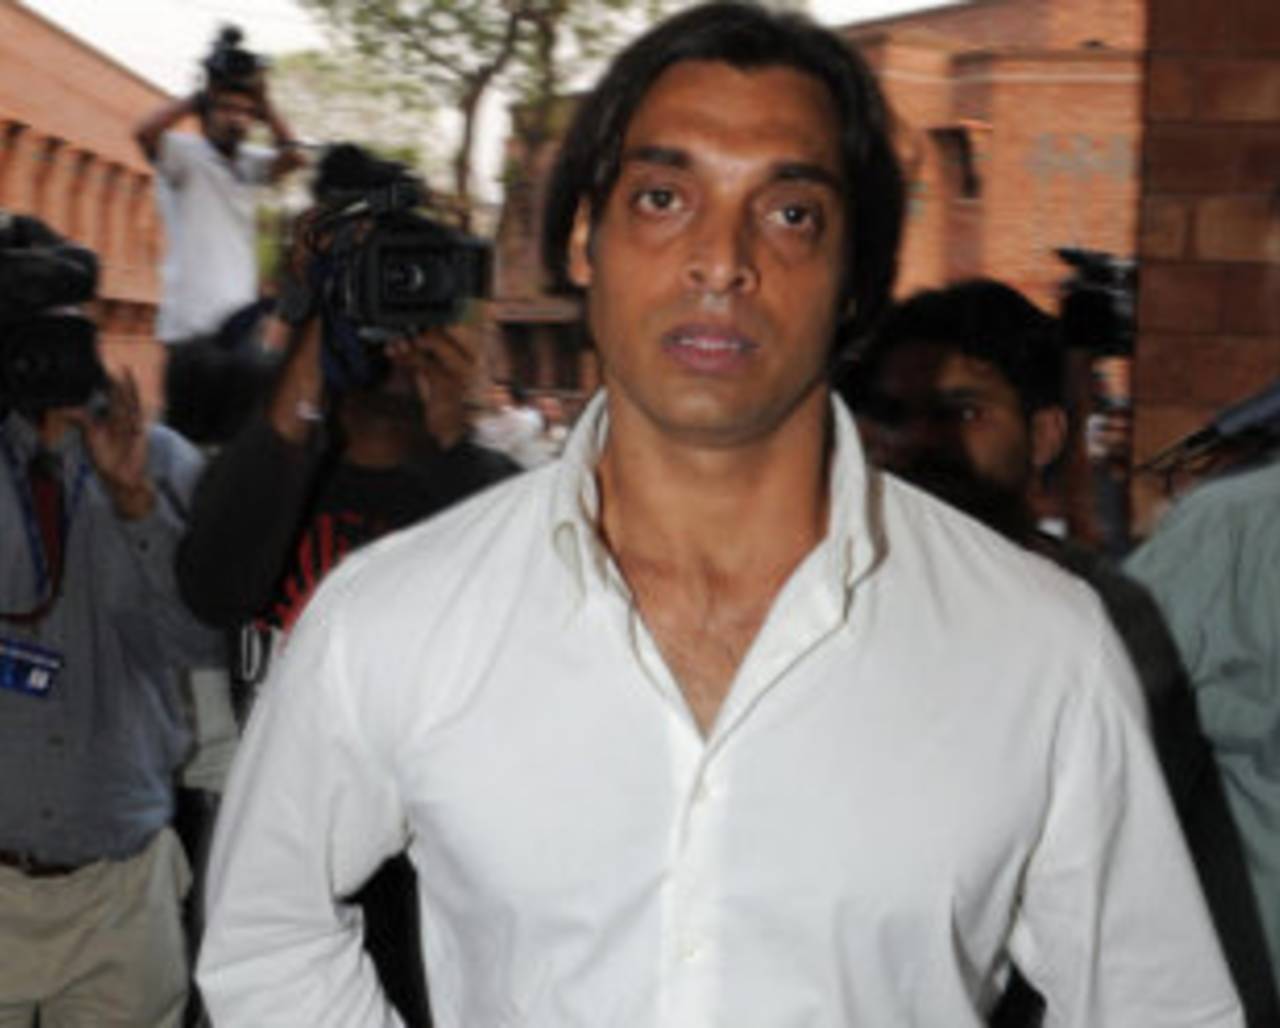 Shoaib Akhtar arrives to attend an appellate tribunal hearing, Lahore, April 28, 2008 